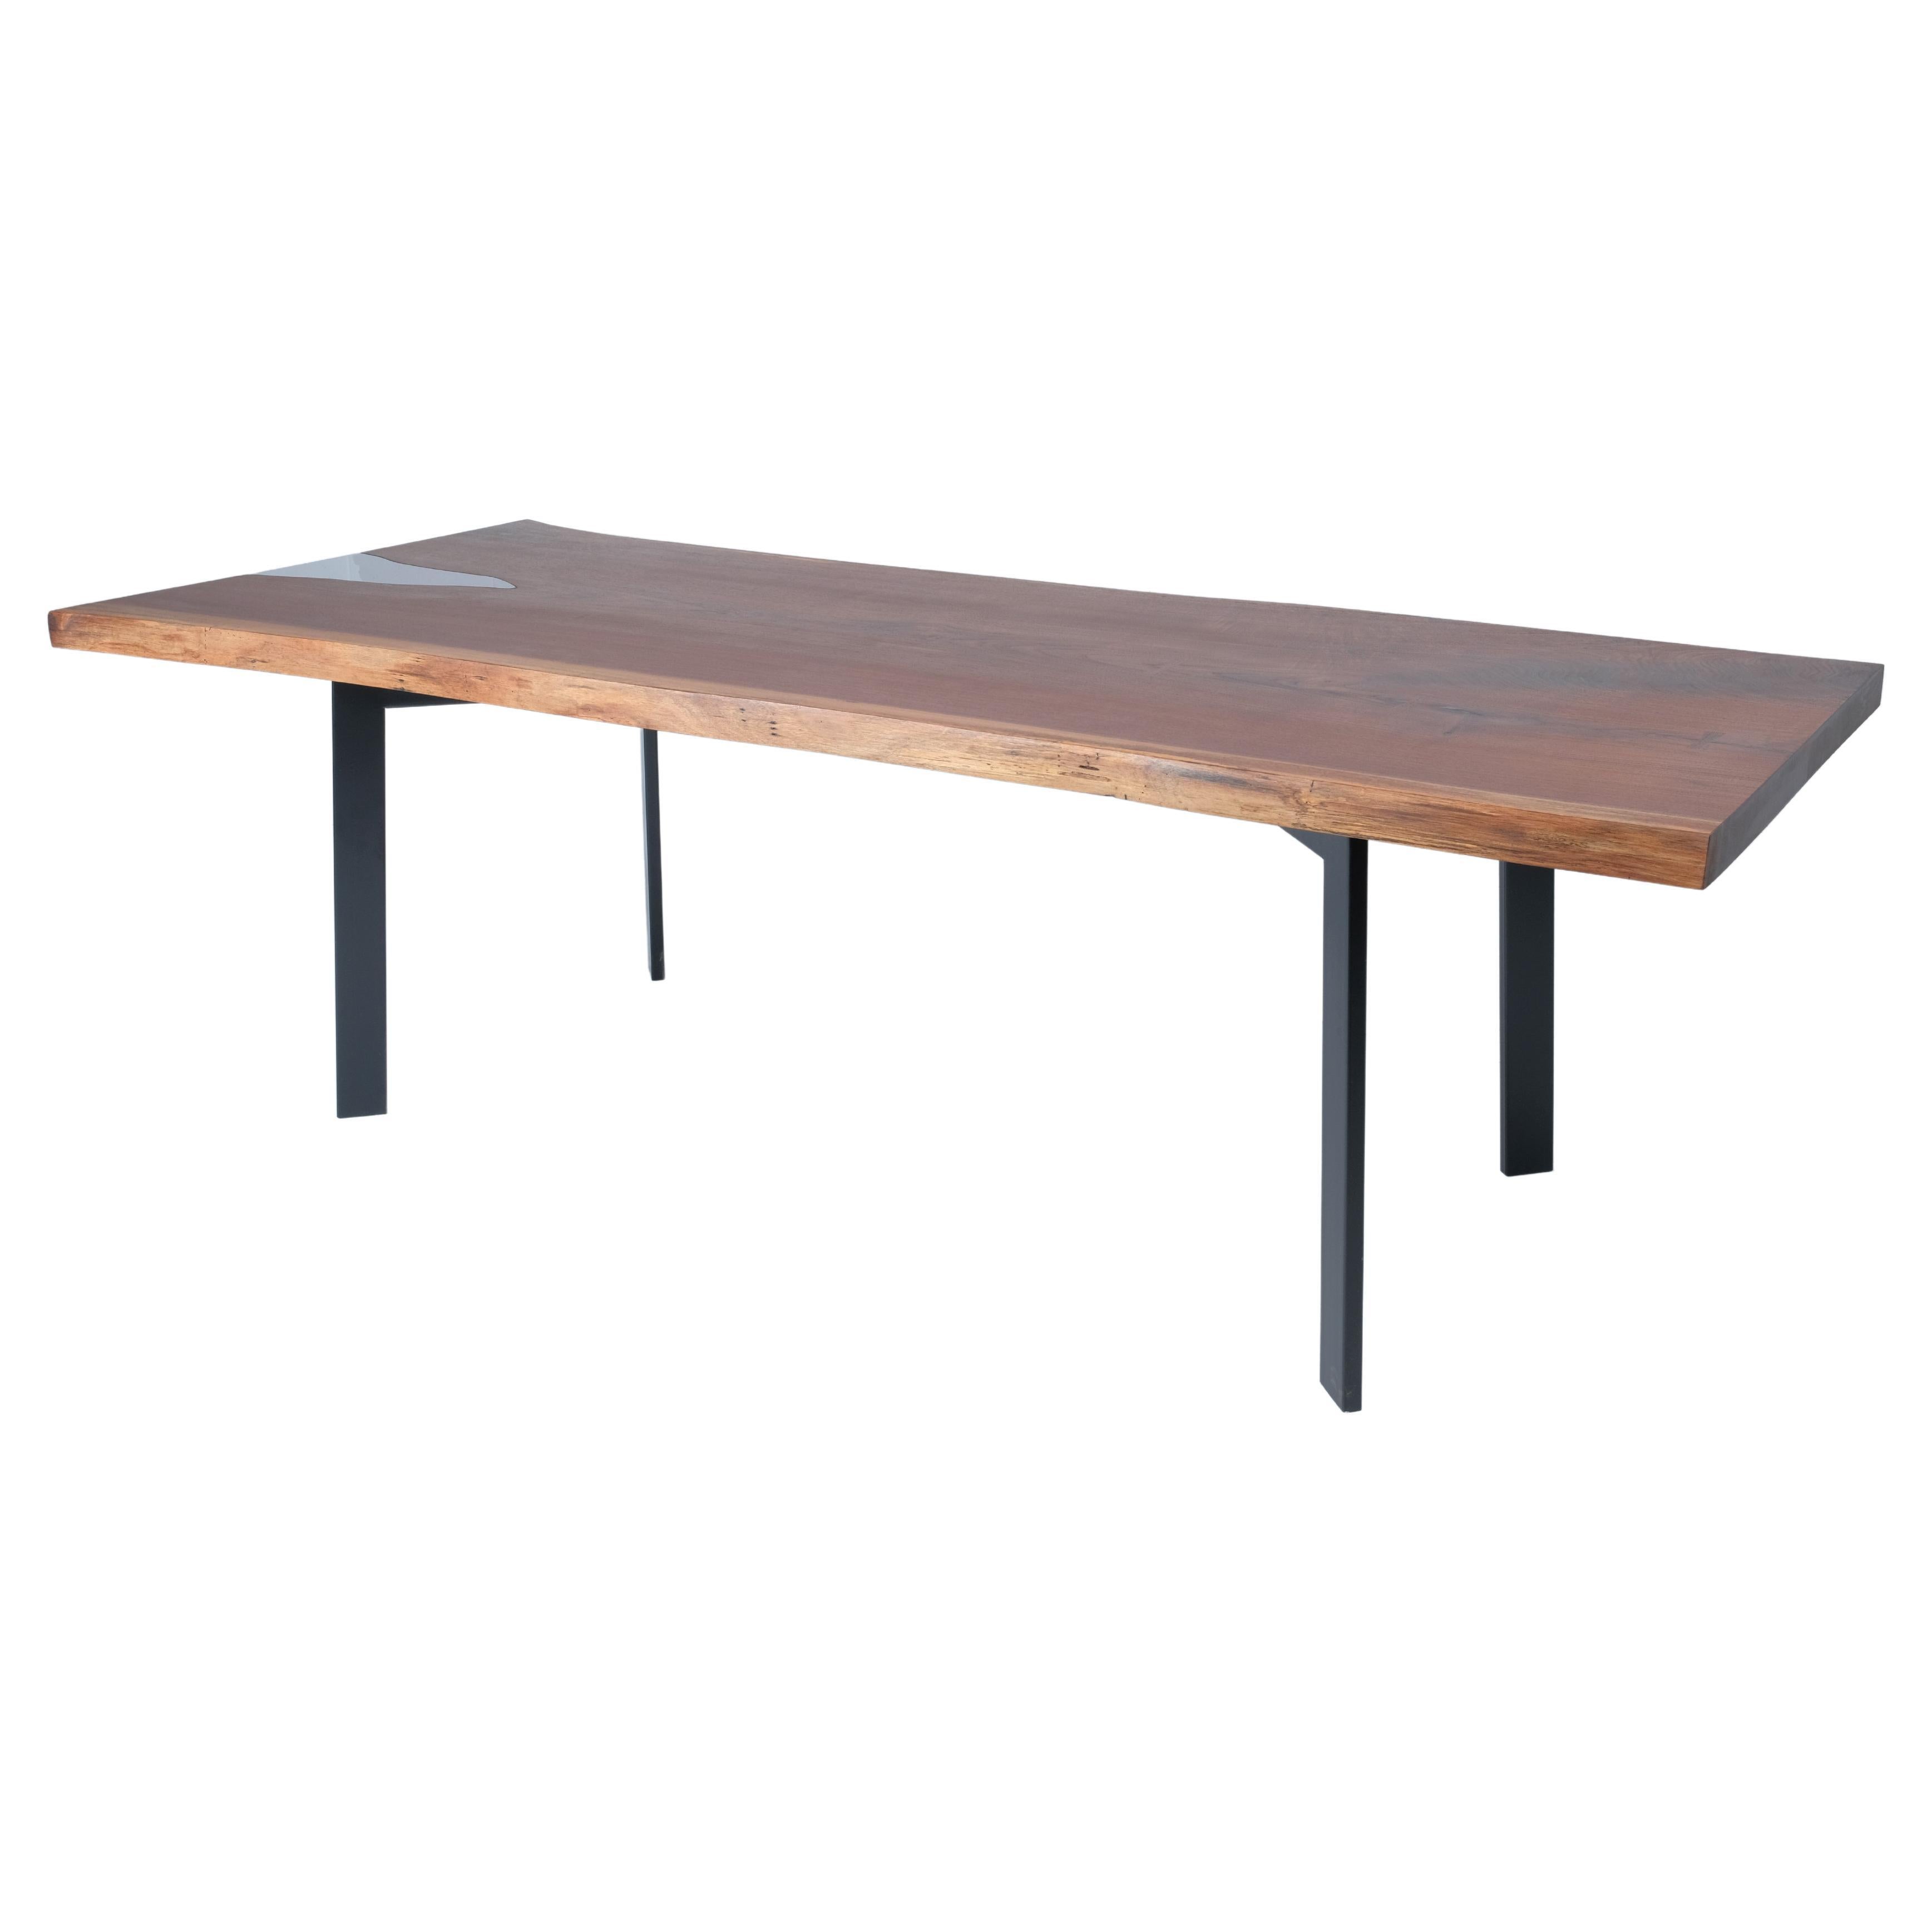 Walnut Live Edge Dining Table with Smoked Inset Glass For Sale